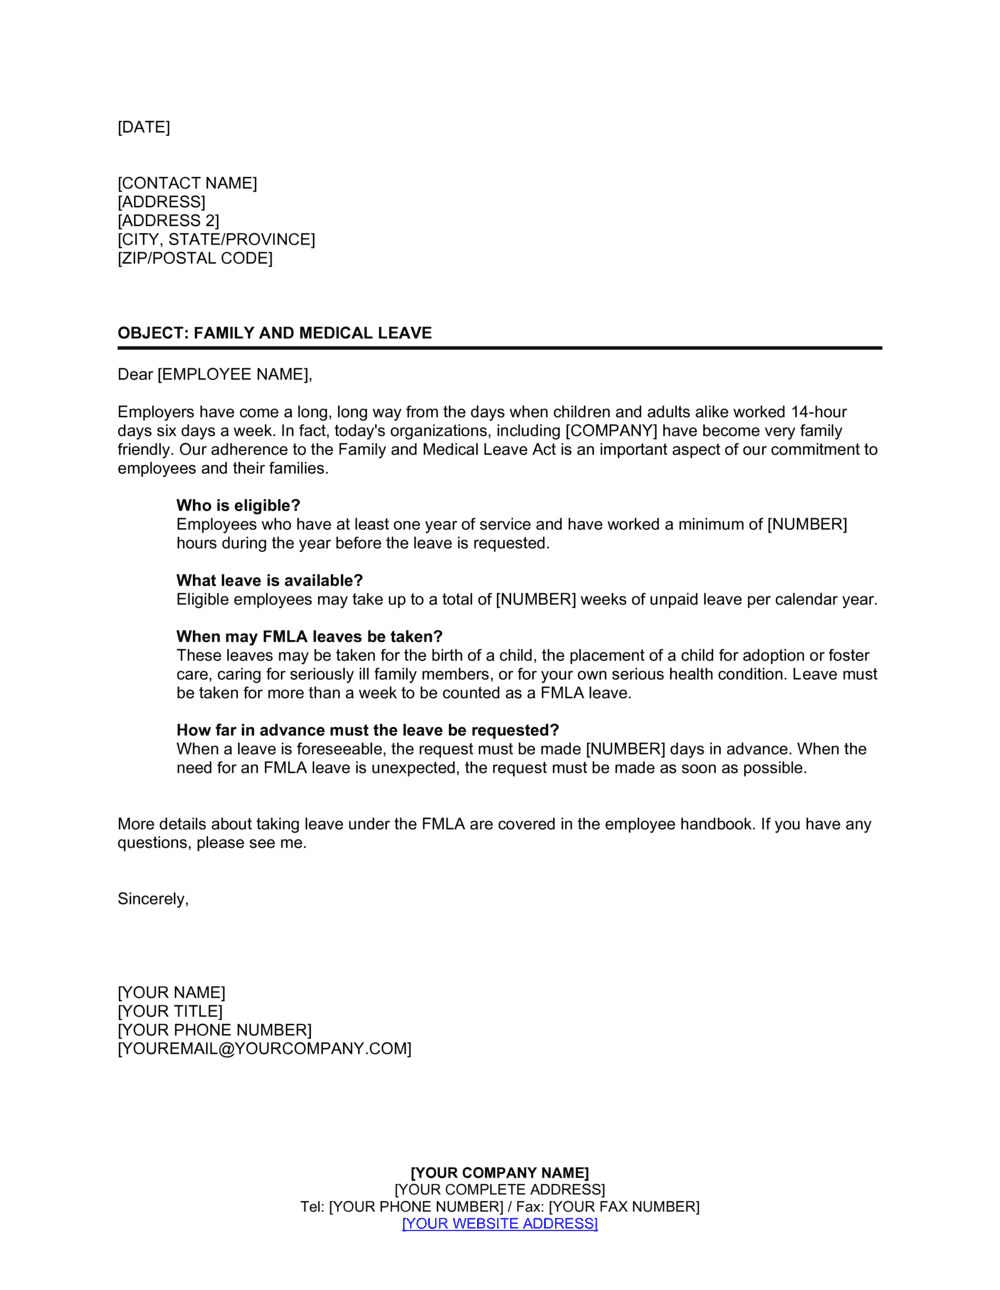 Letter Explaining Family and Medical Leave Template  by Business